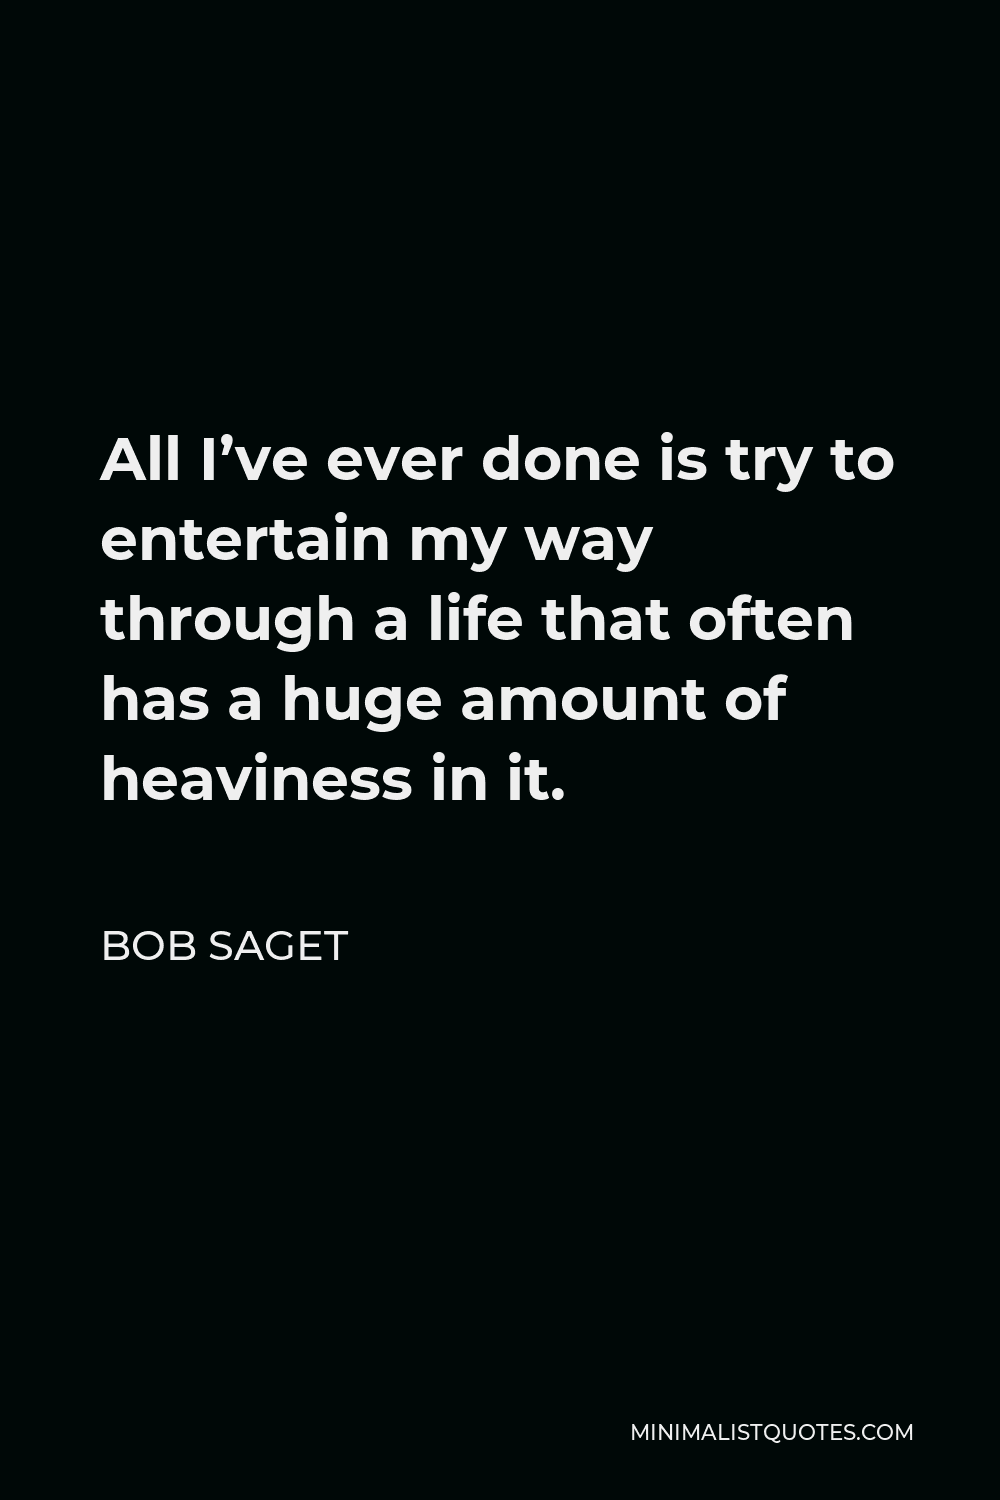 Bob Saget Quote - All I’ve ever done is try to entertain my way through a life that often has a huge amount of heaviness in it.